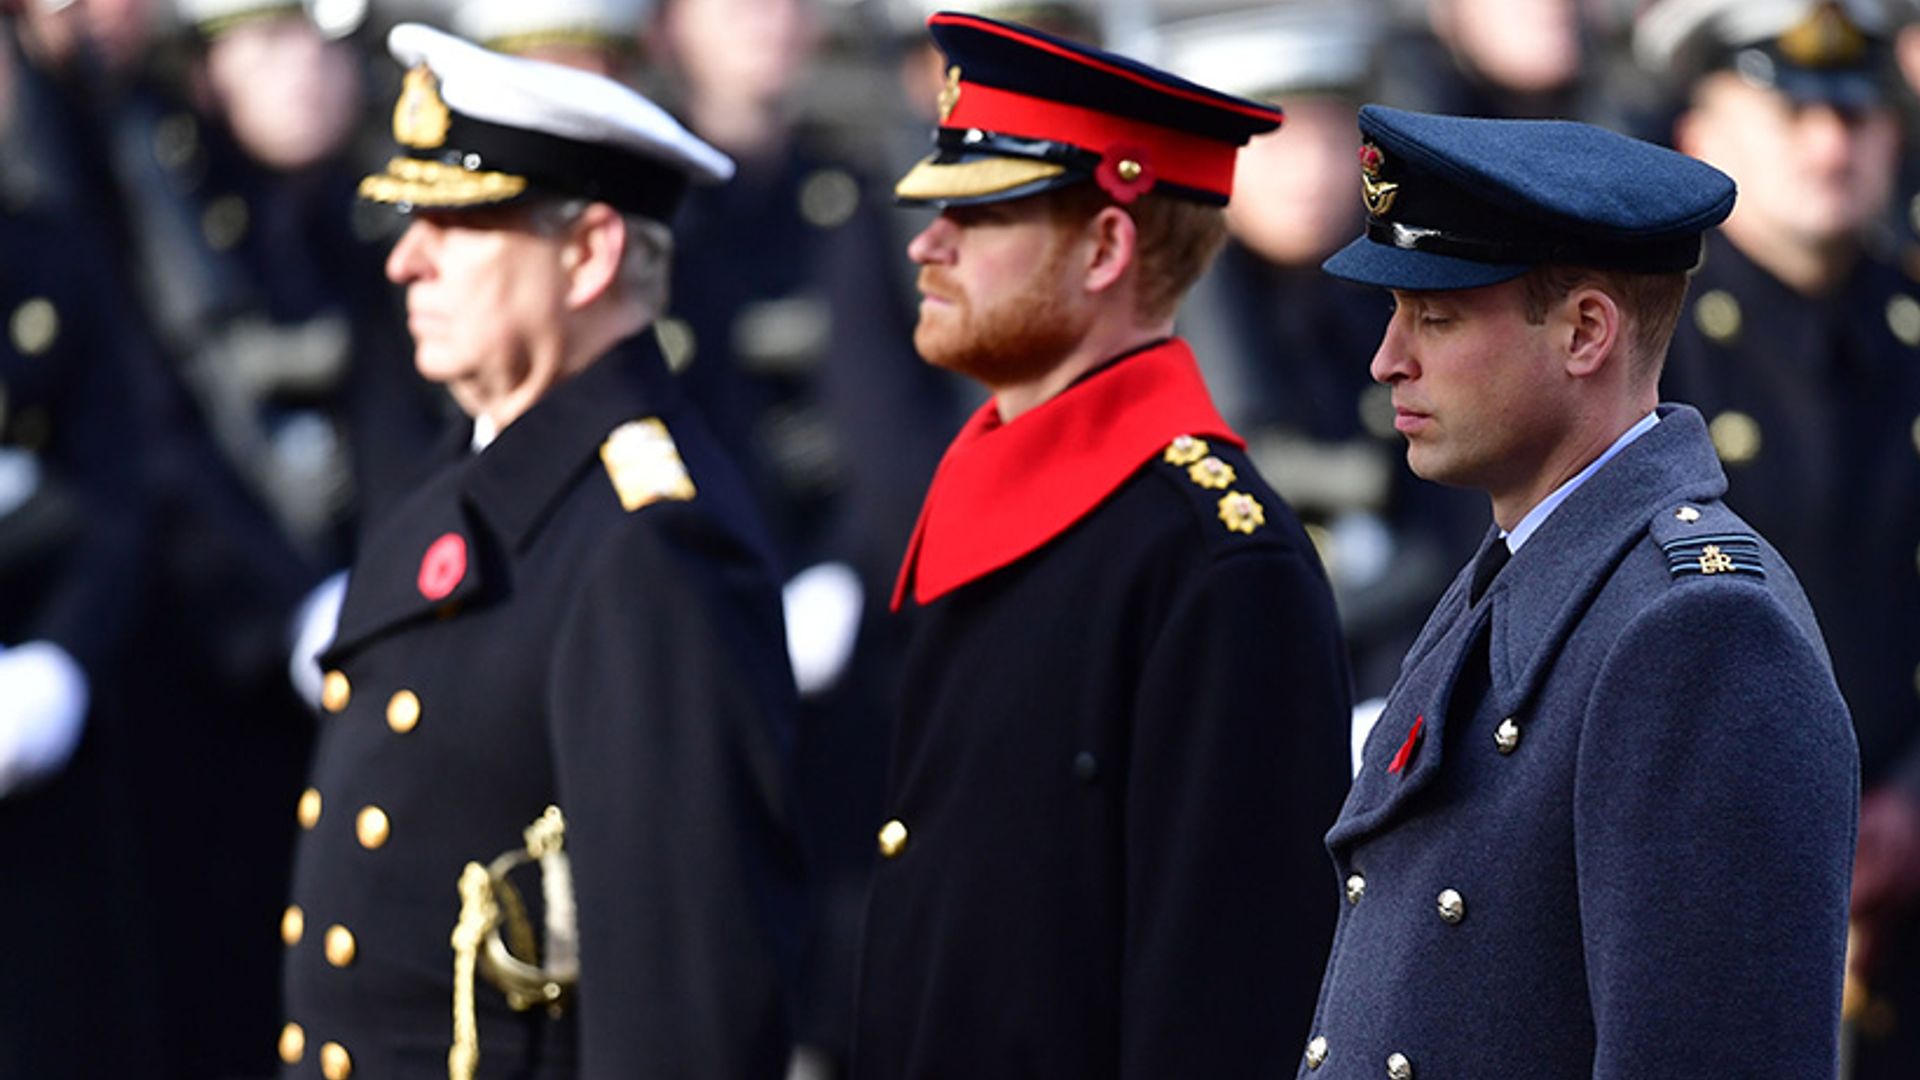 The royal family honour the country's war heroes on Remembrance Sunday